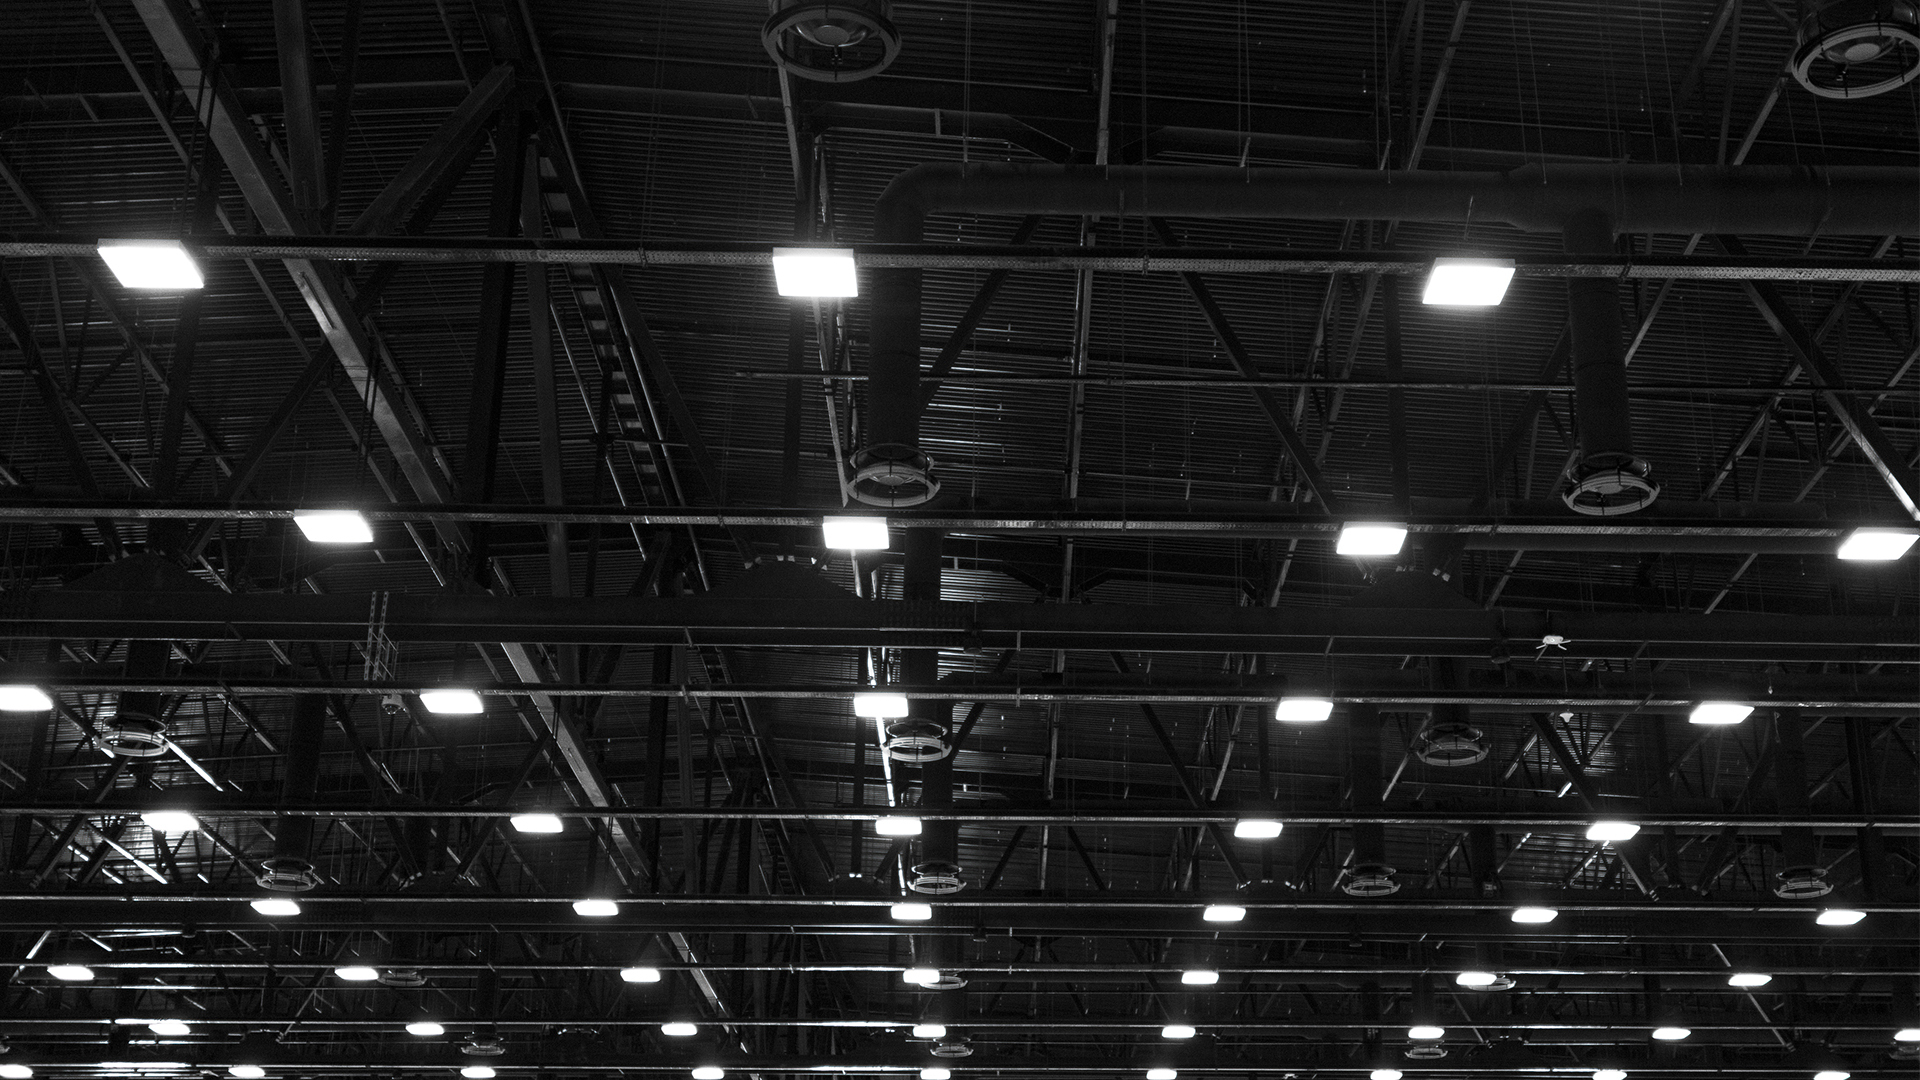 Exhibition hall with black ceiling